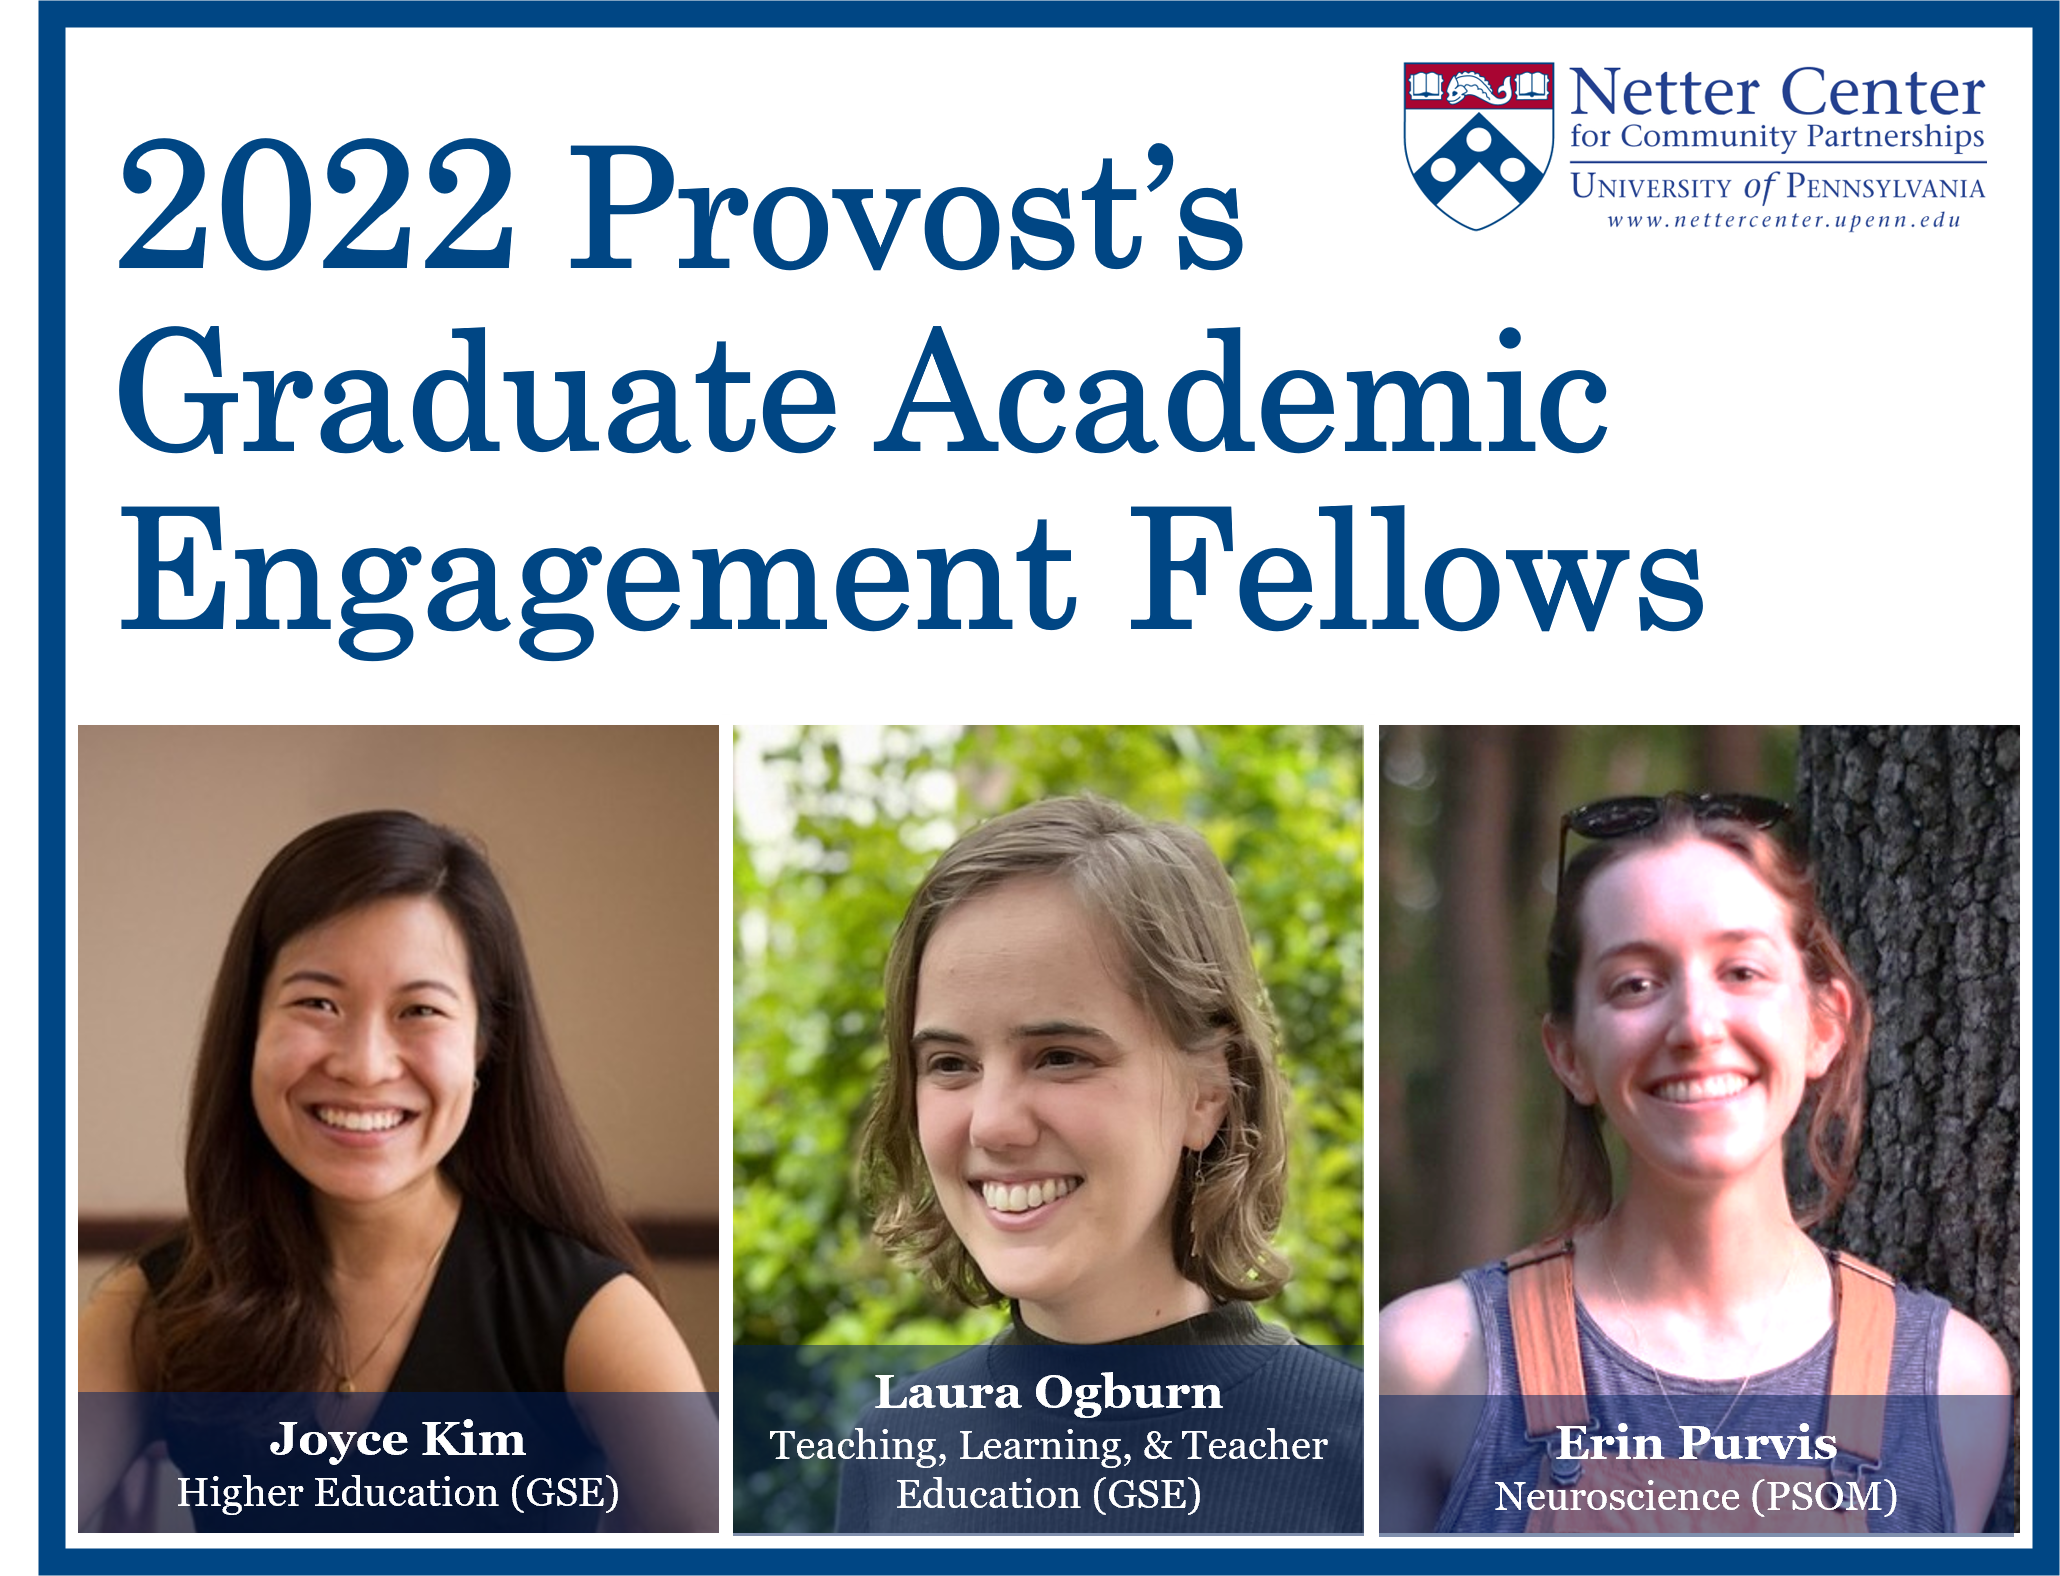 Blue outline box containing headshots of three fellows with text above reading "2022 Provost's Graduate Academic Engagement Fellows"